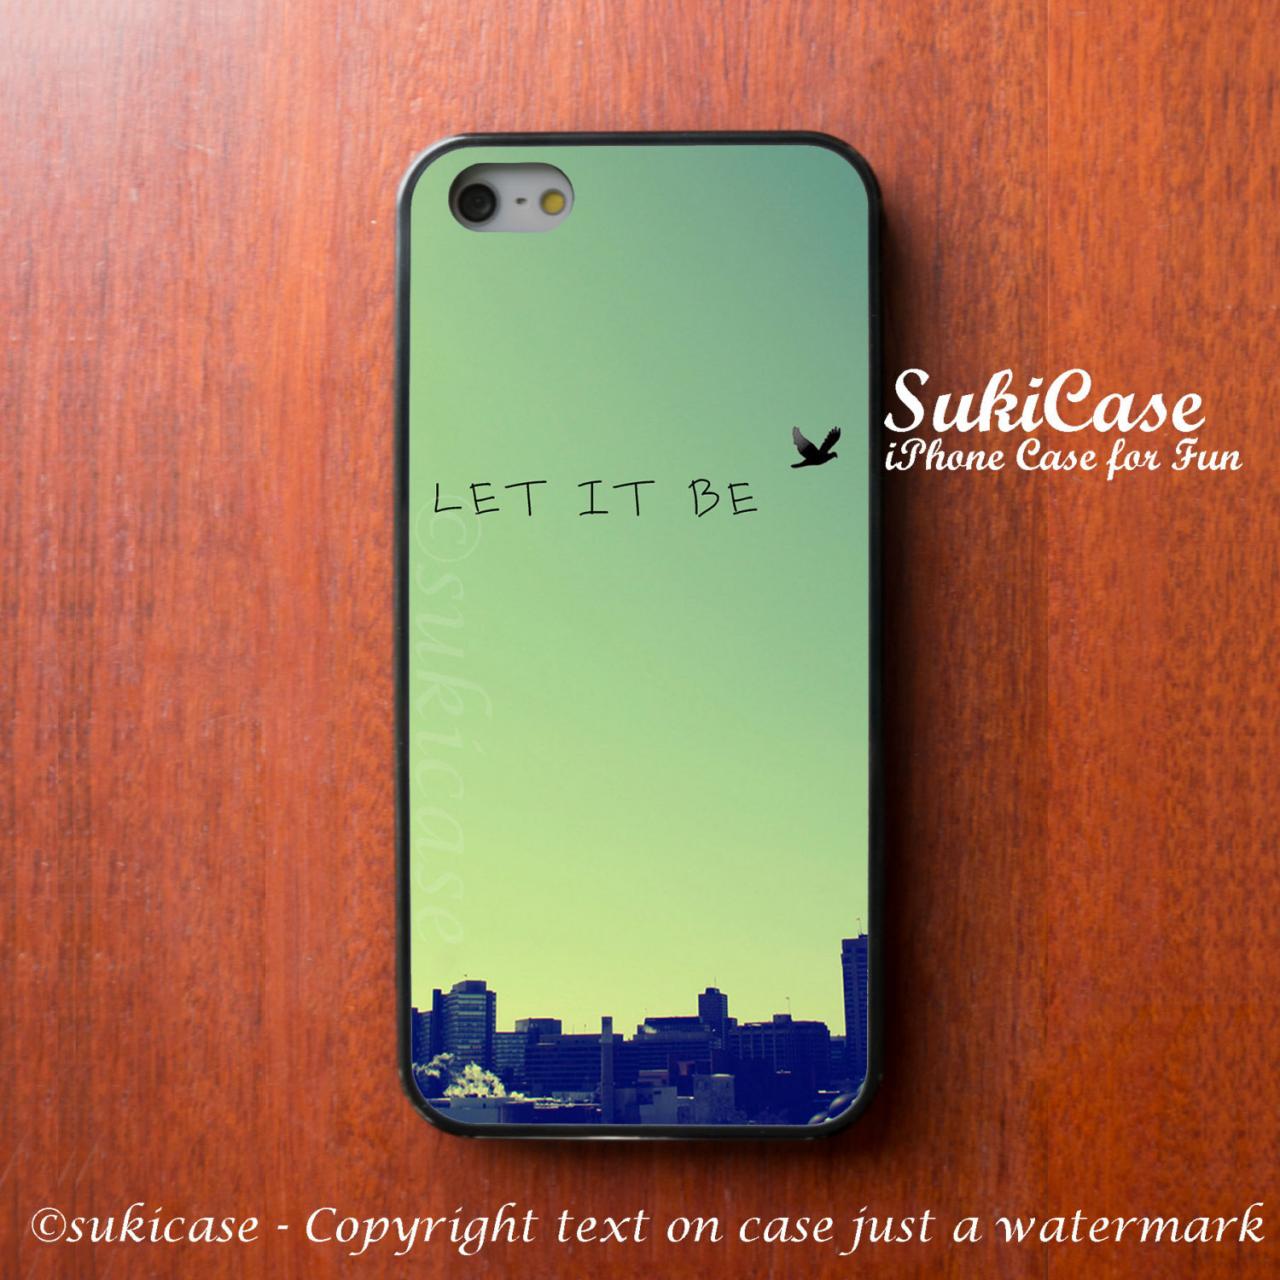 Iphone 5 Case Let It Be Bird Flying Over City Iphone 5s Iphone 4 Iphone Cases Samsung Galaxy S3 Case Samsung S4 Cover Iphone 5c Iphone 4s